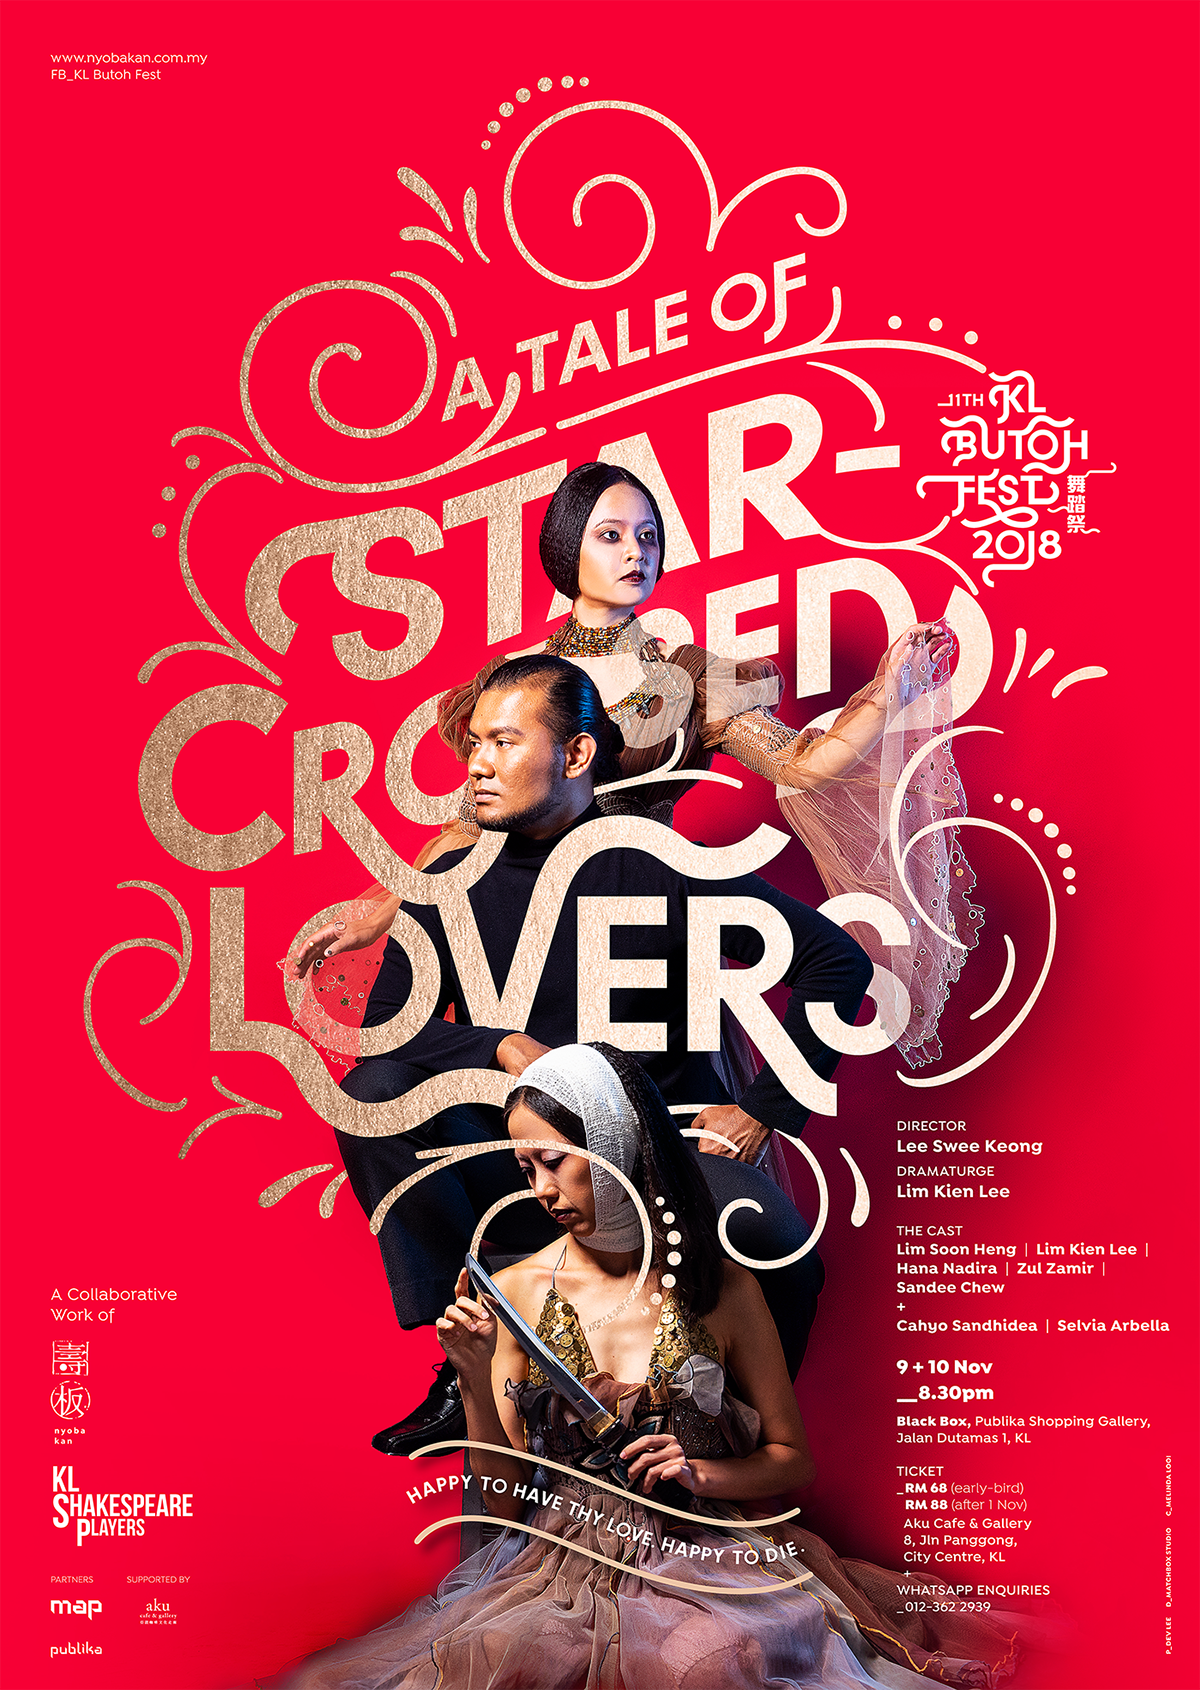 a tale of star-crossed lovers Nyoba Kan KL butoh fest kl shakespeare players matchbox studio Romeo and Juliet shakespeare